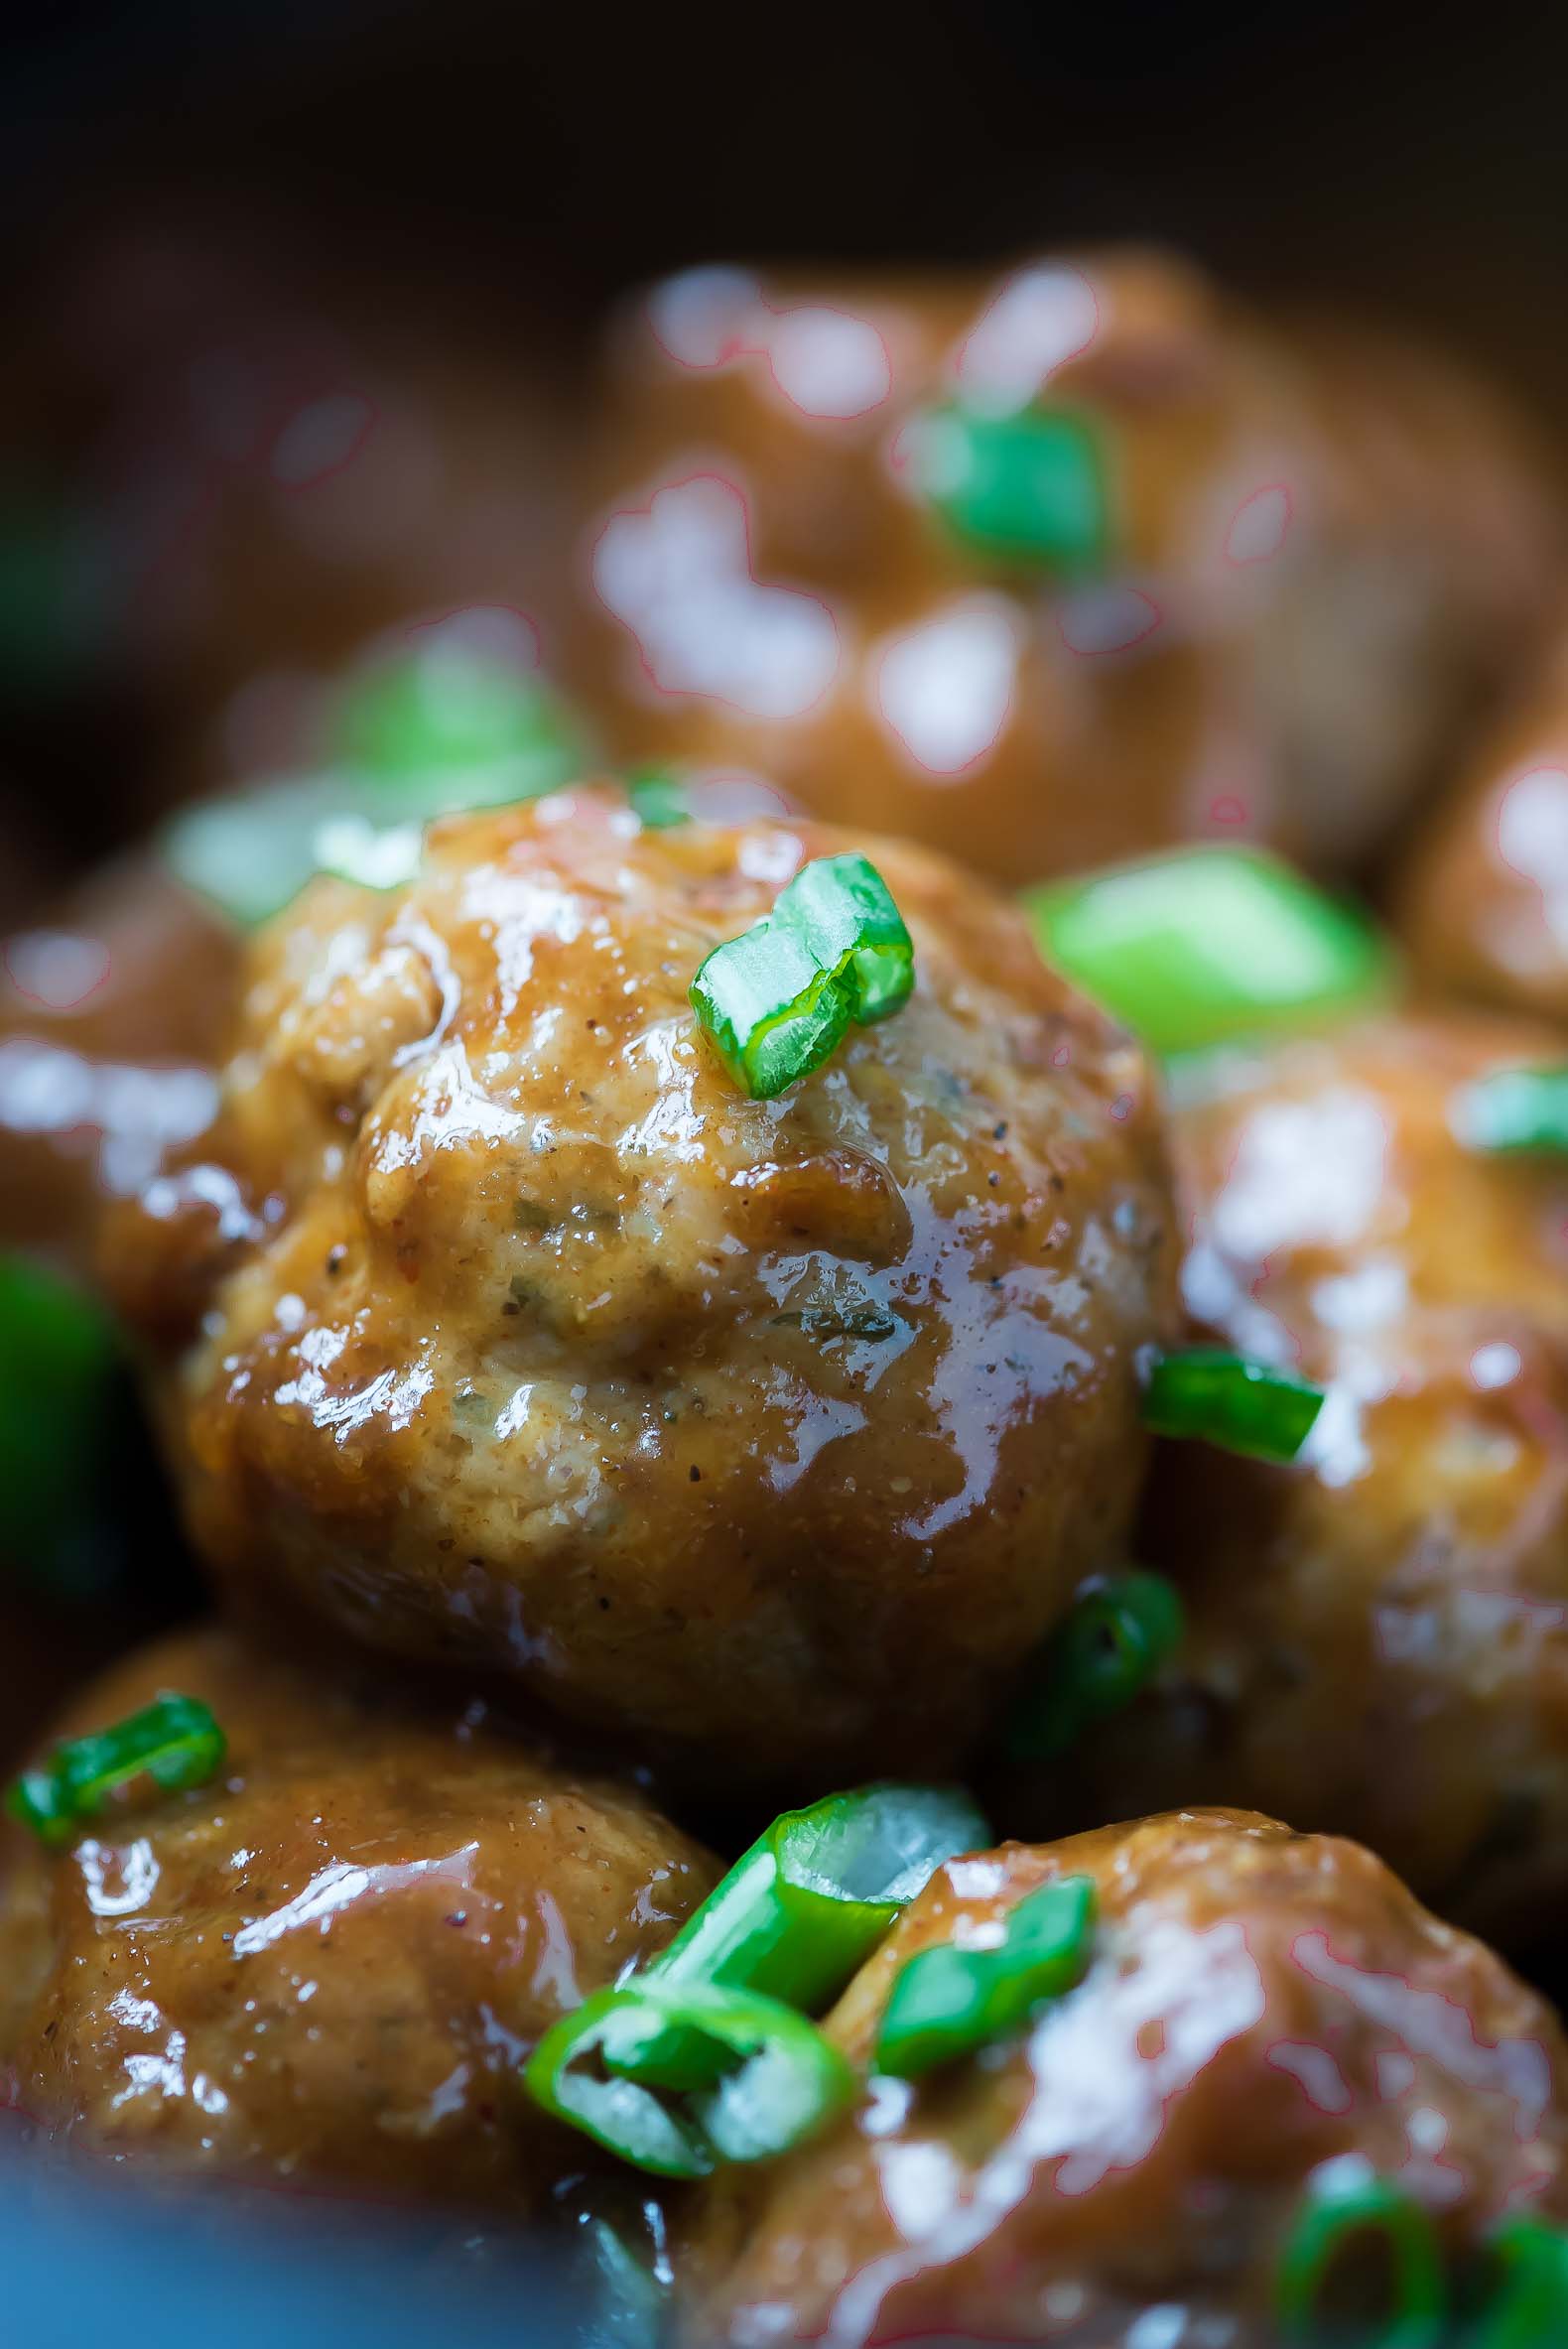 Slow Cooker Meatballs, Easy, Appetizers, Frozen, Healthy, Recipes, Best, Party, Crock Pots, Honey, Chicken, Spicy, Low Carb, Clean, Cocktail